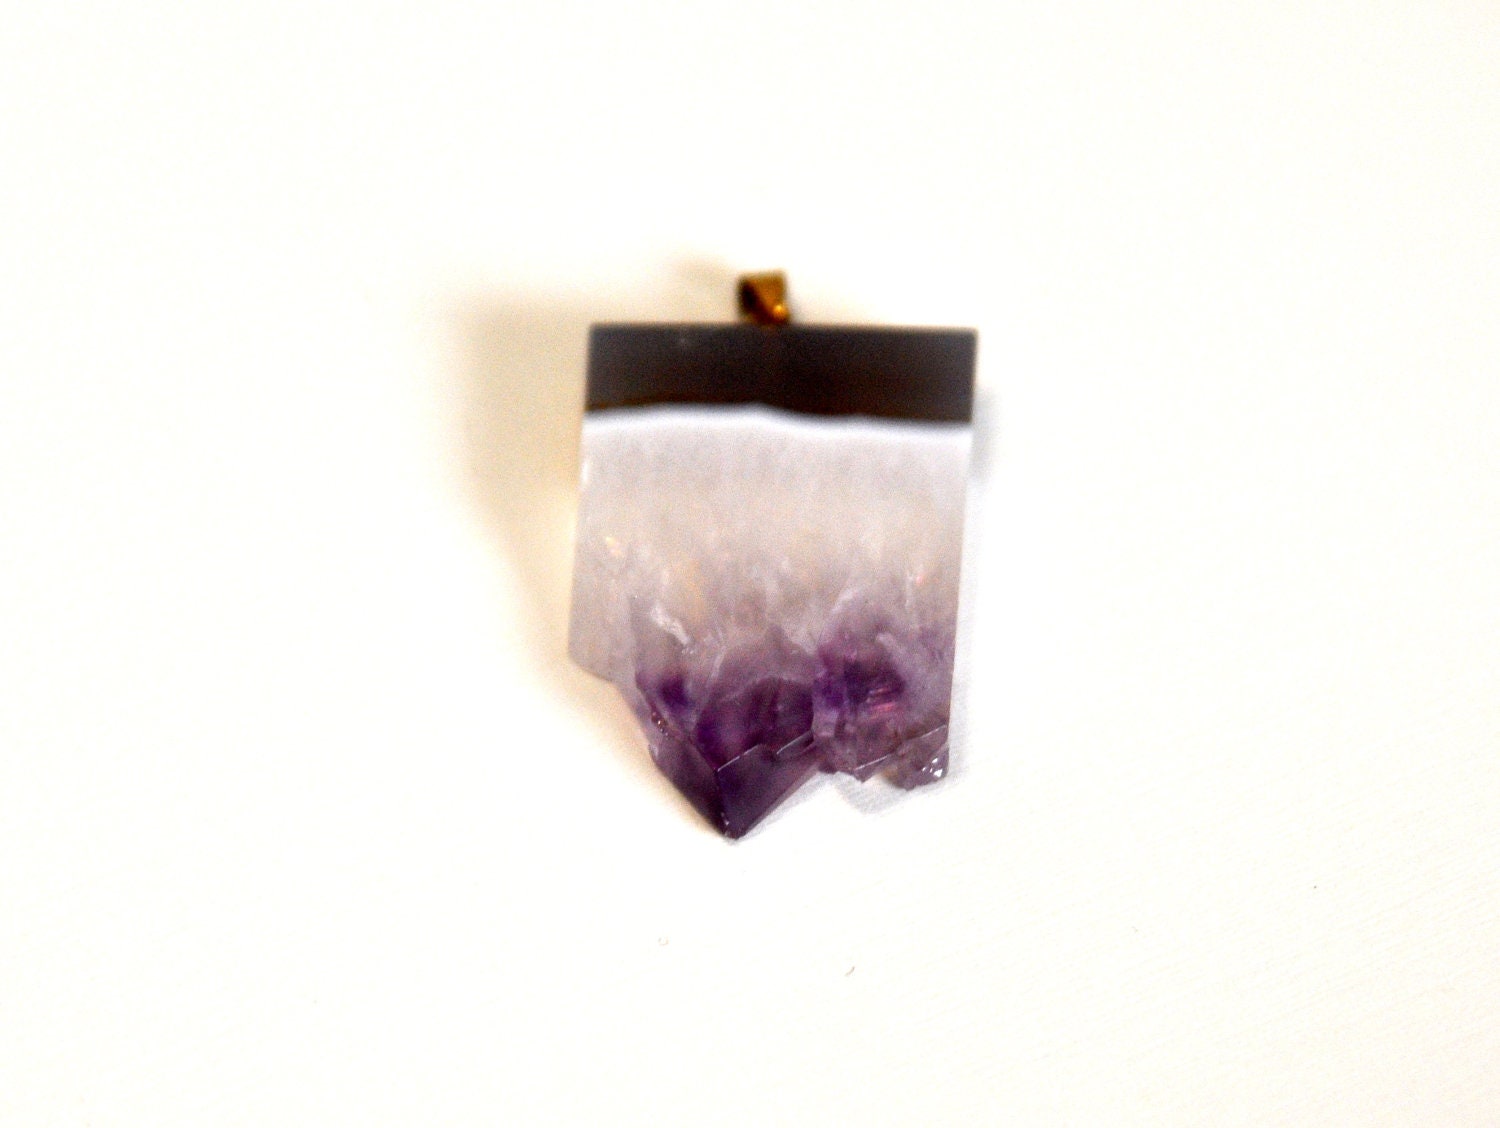 Raw Amethyst Stone Pendant - SALE ITEM deeply discounted